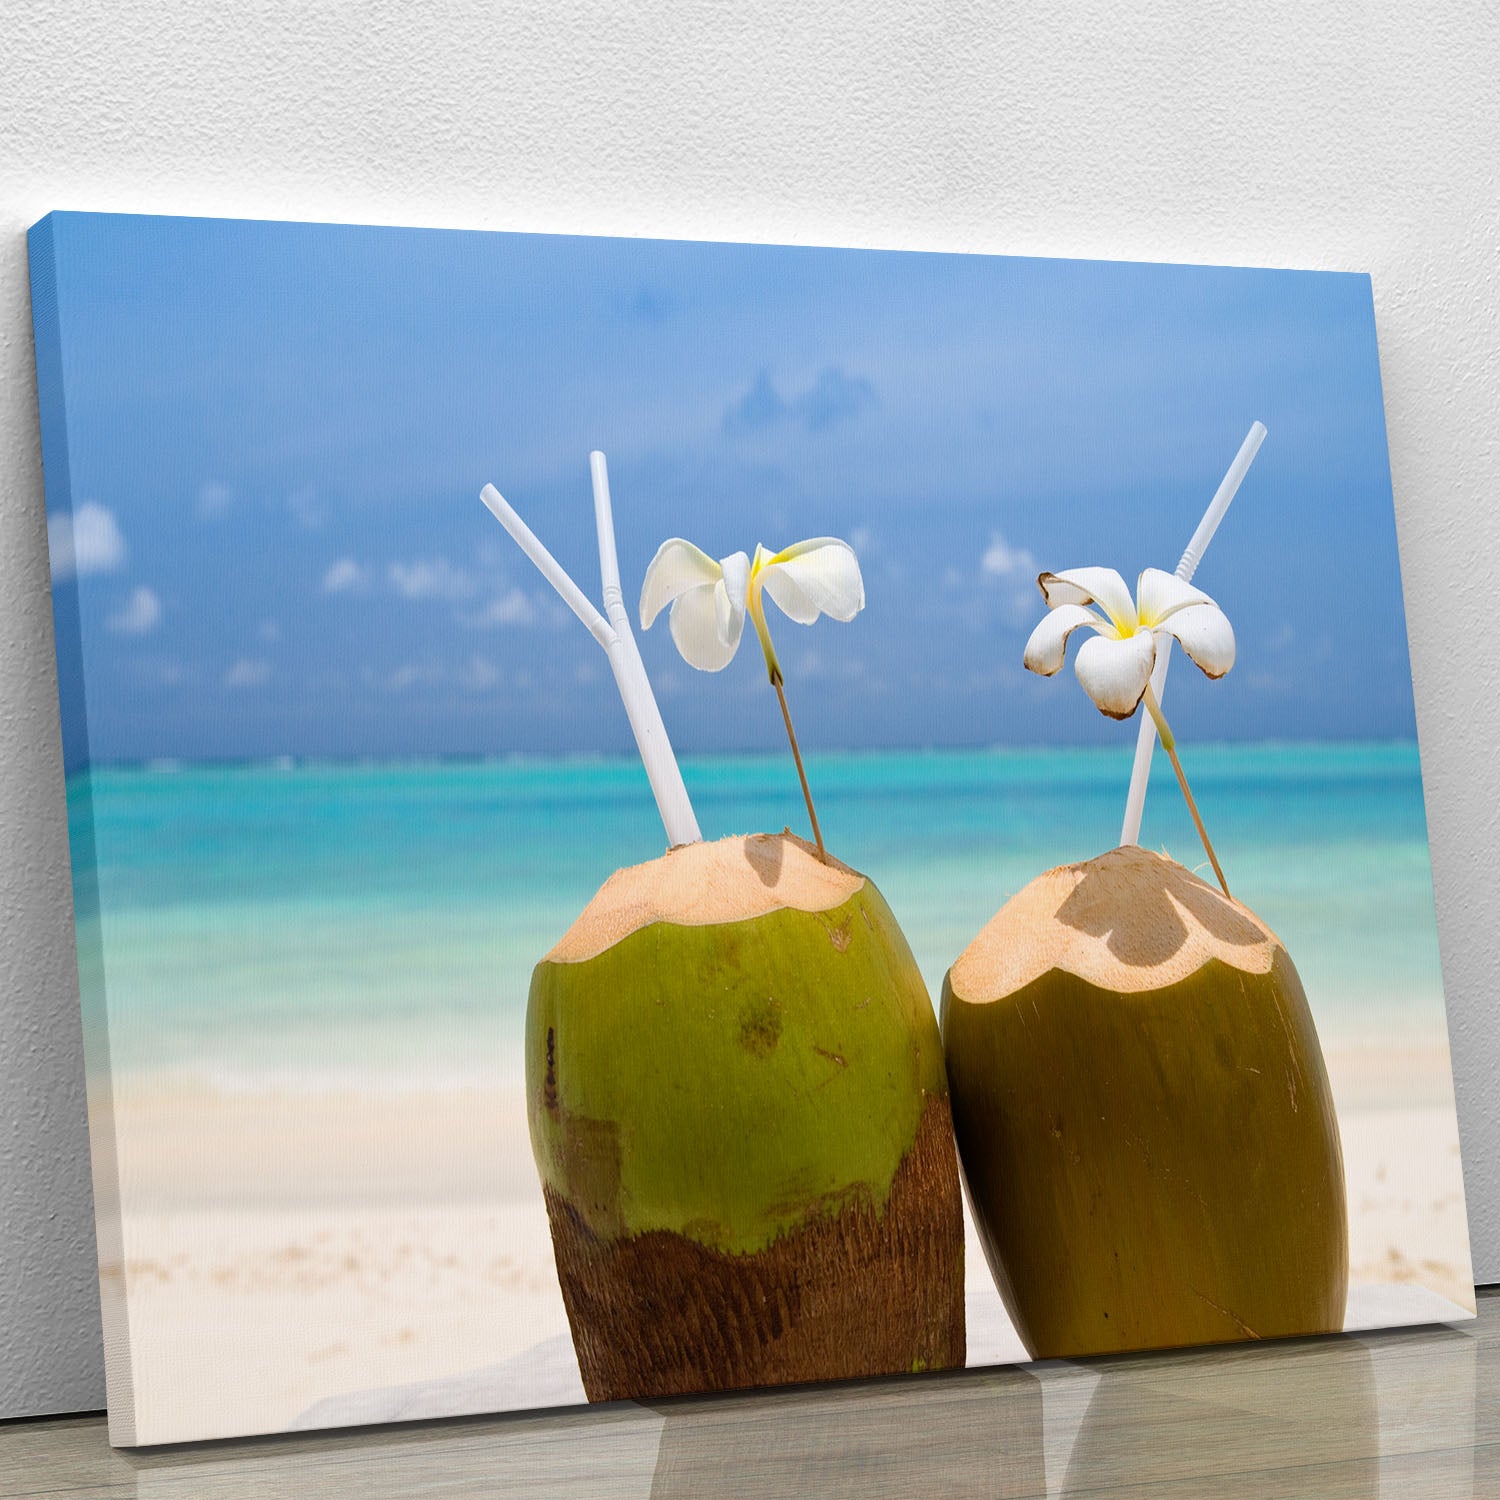 Tropical Coconut Cocktail Canvas Print or Poster - Canvas Art Rocks - 1